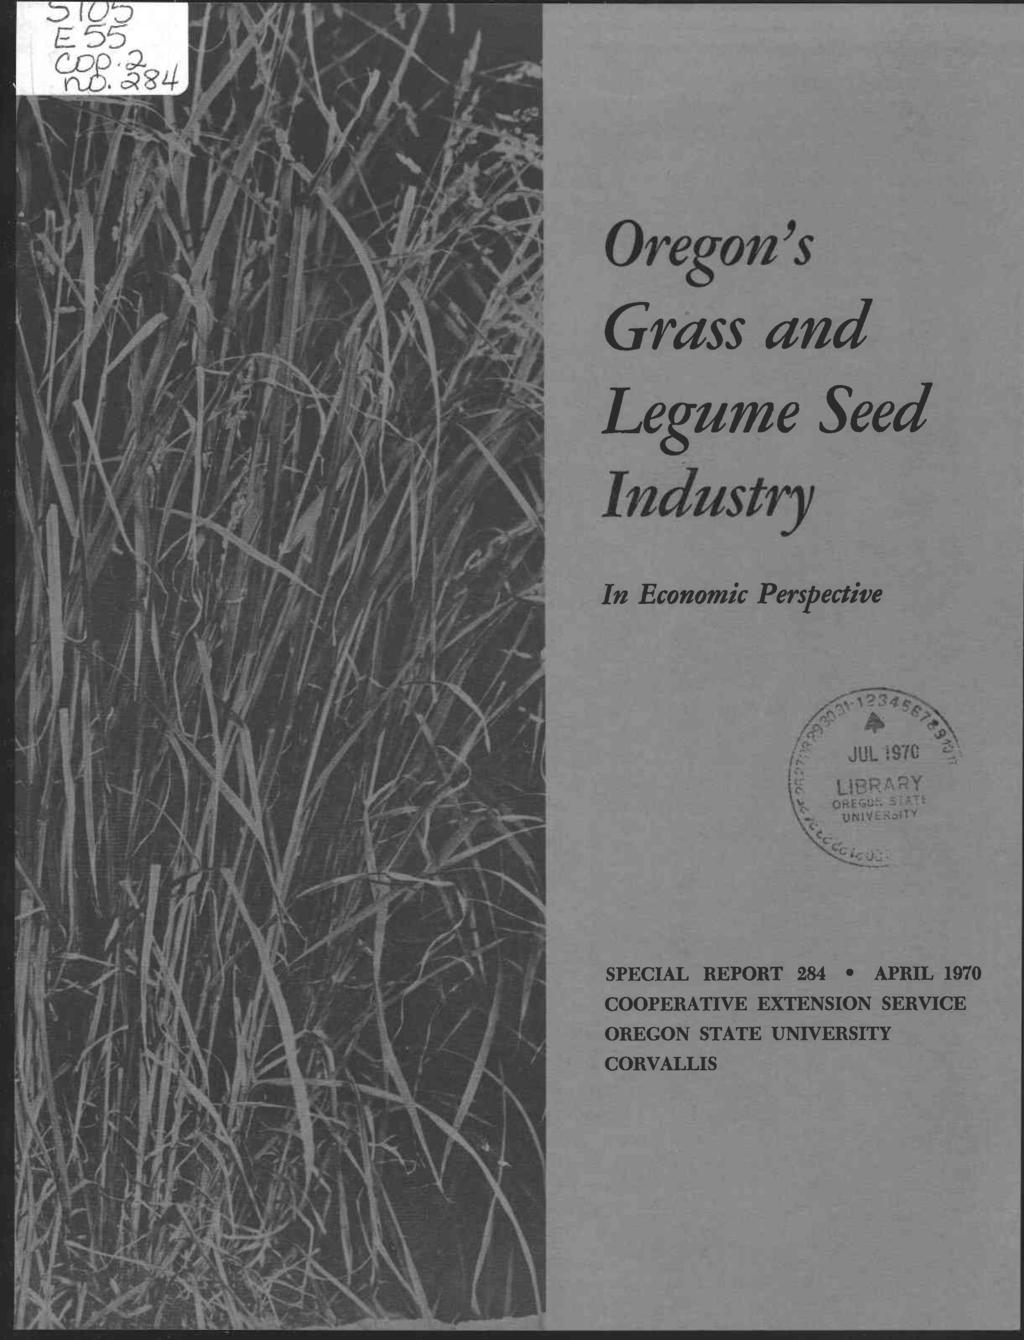 Oregon's Grass and Legume Seed Industry In Economic Perspective SPECIAL REPORT